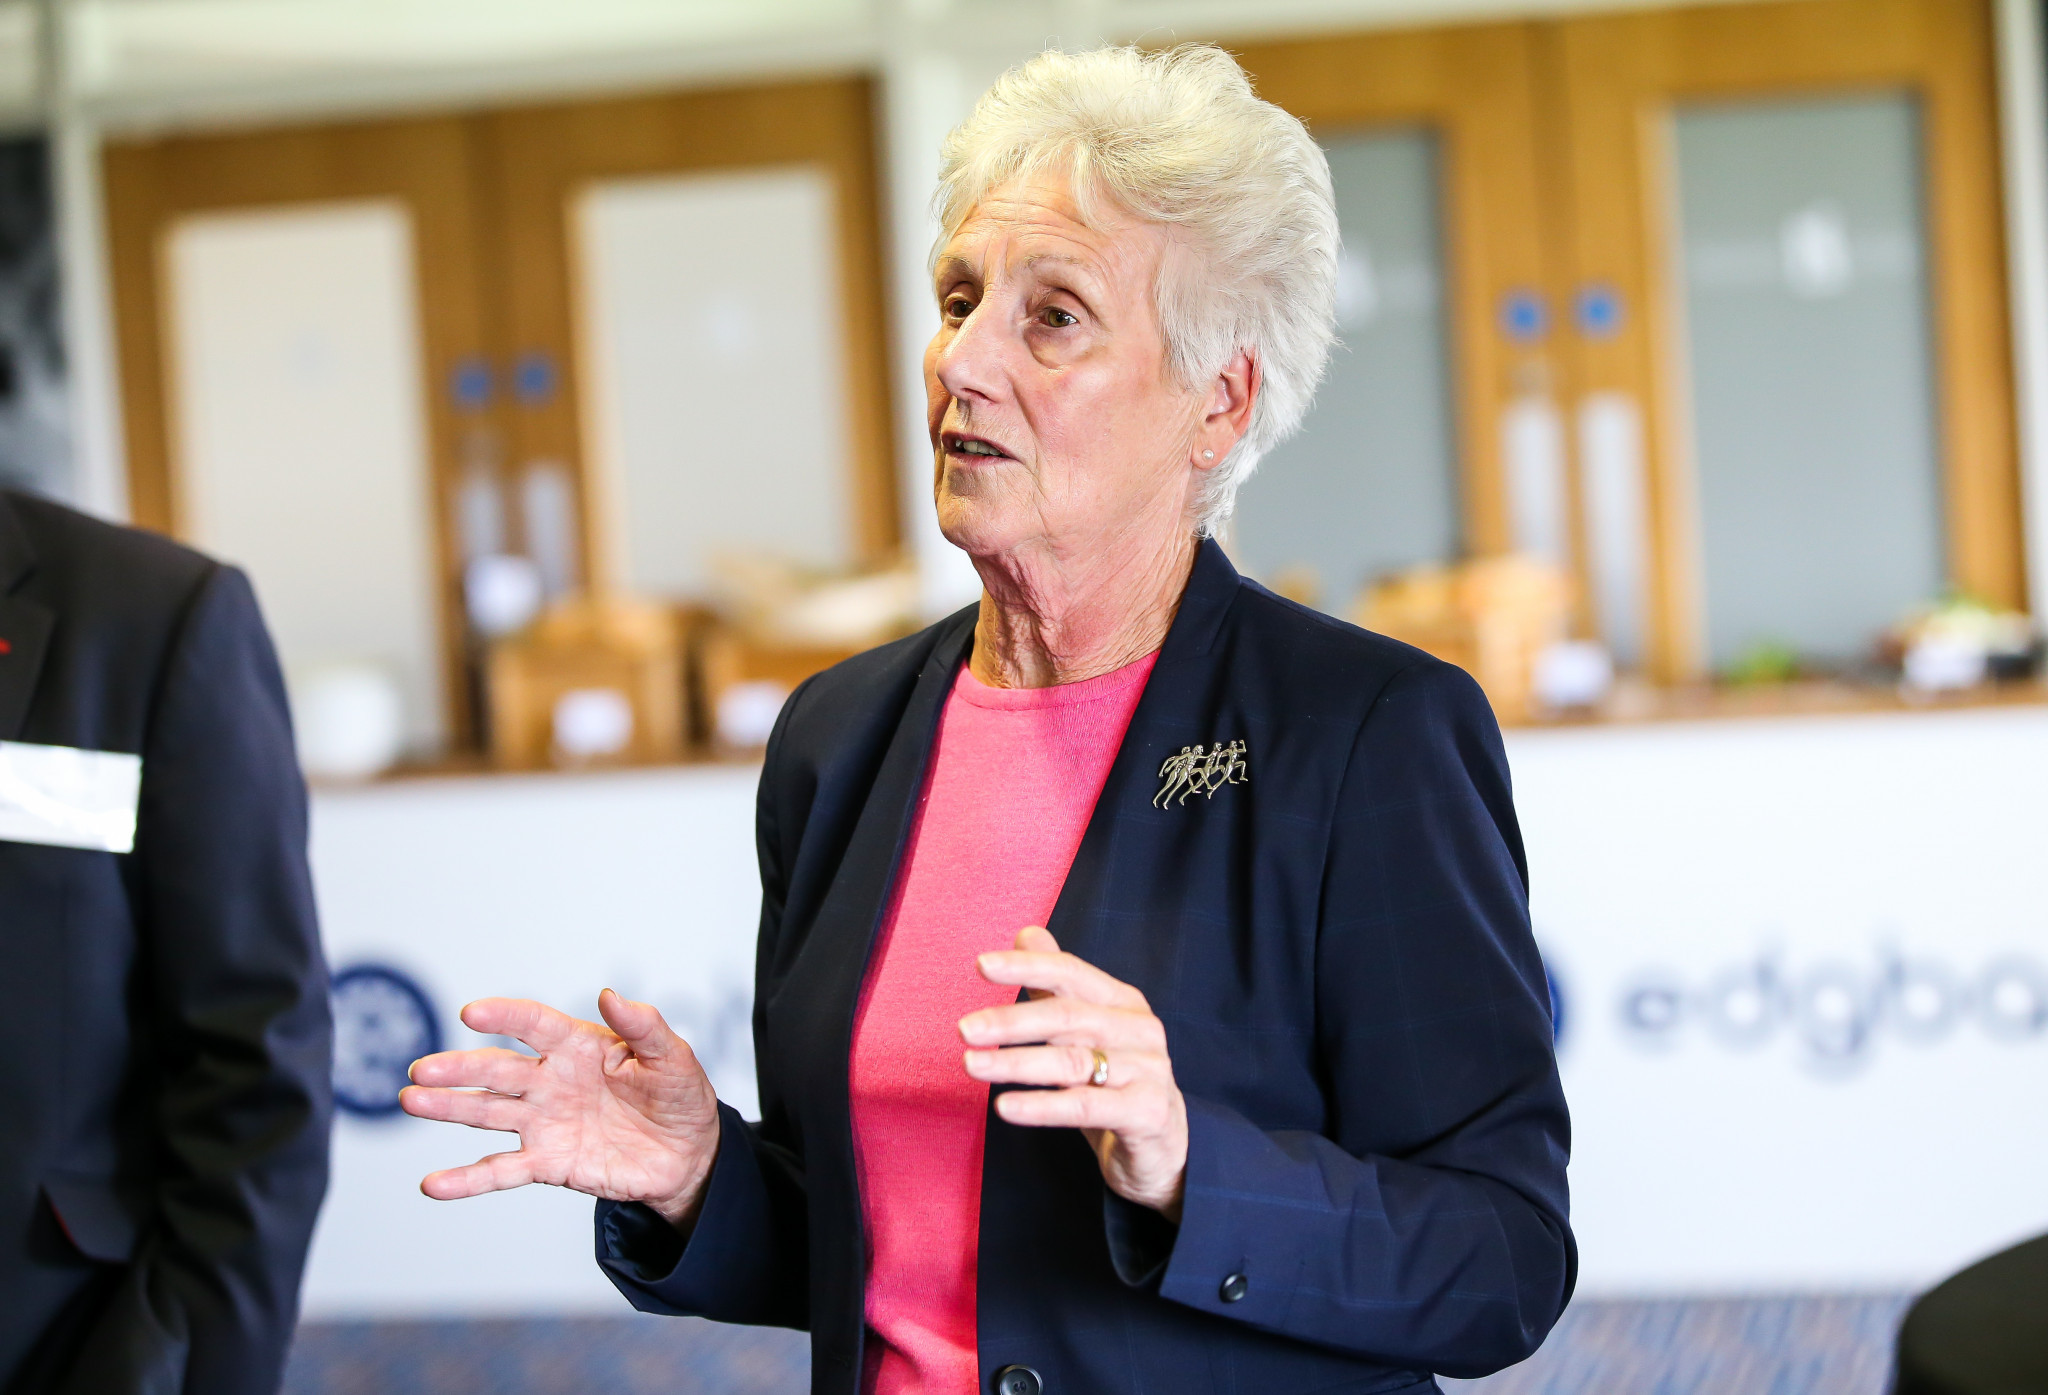 CGF President Dame Louise Martin claimed the overlap between the Women's Euros and Birmingham 2022 Commonwealth Games was an 